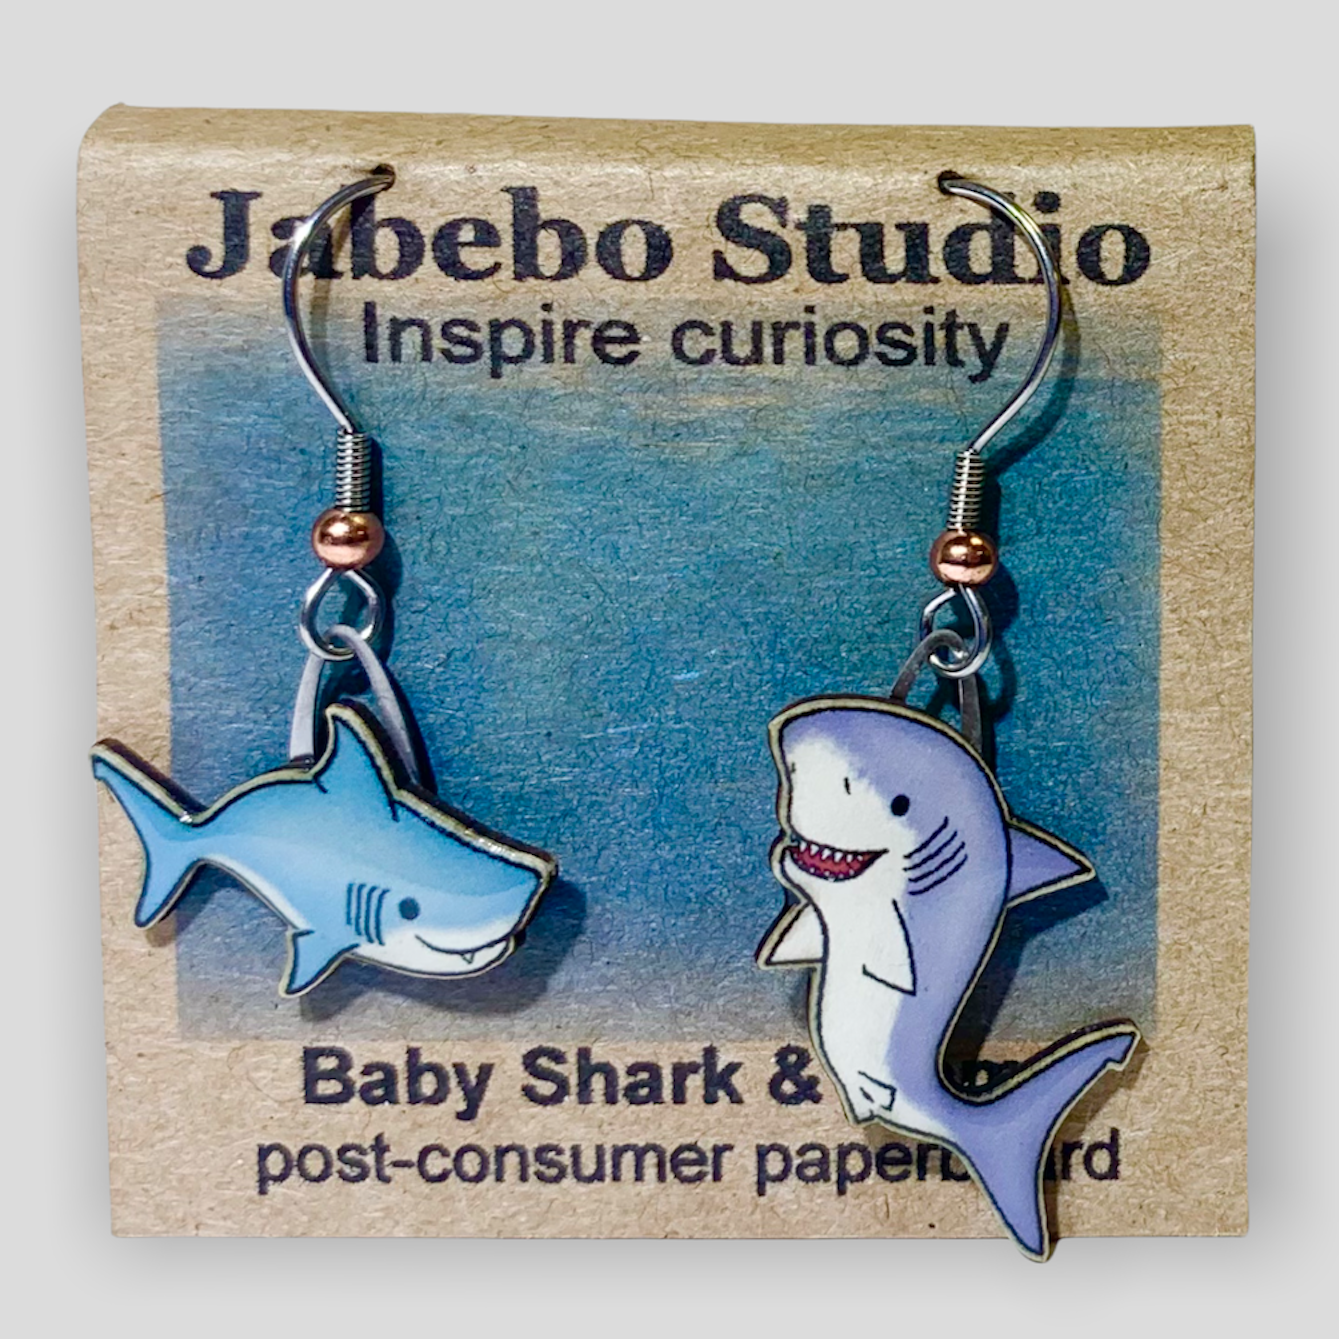 Picture shown is of 1 inch tall pair of earrings of the marine animal the Baby Shark & Mama.